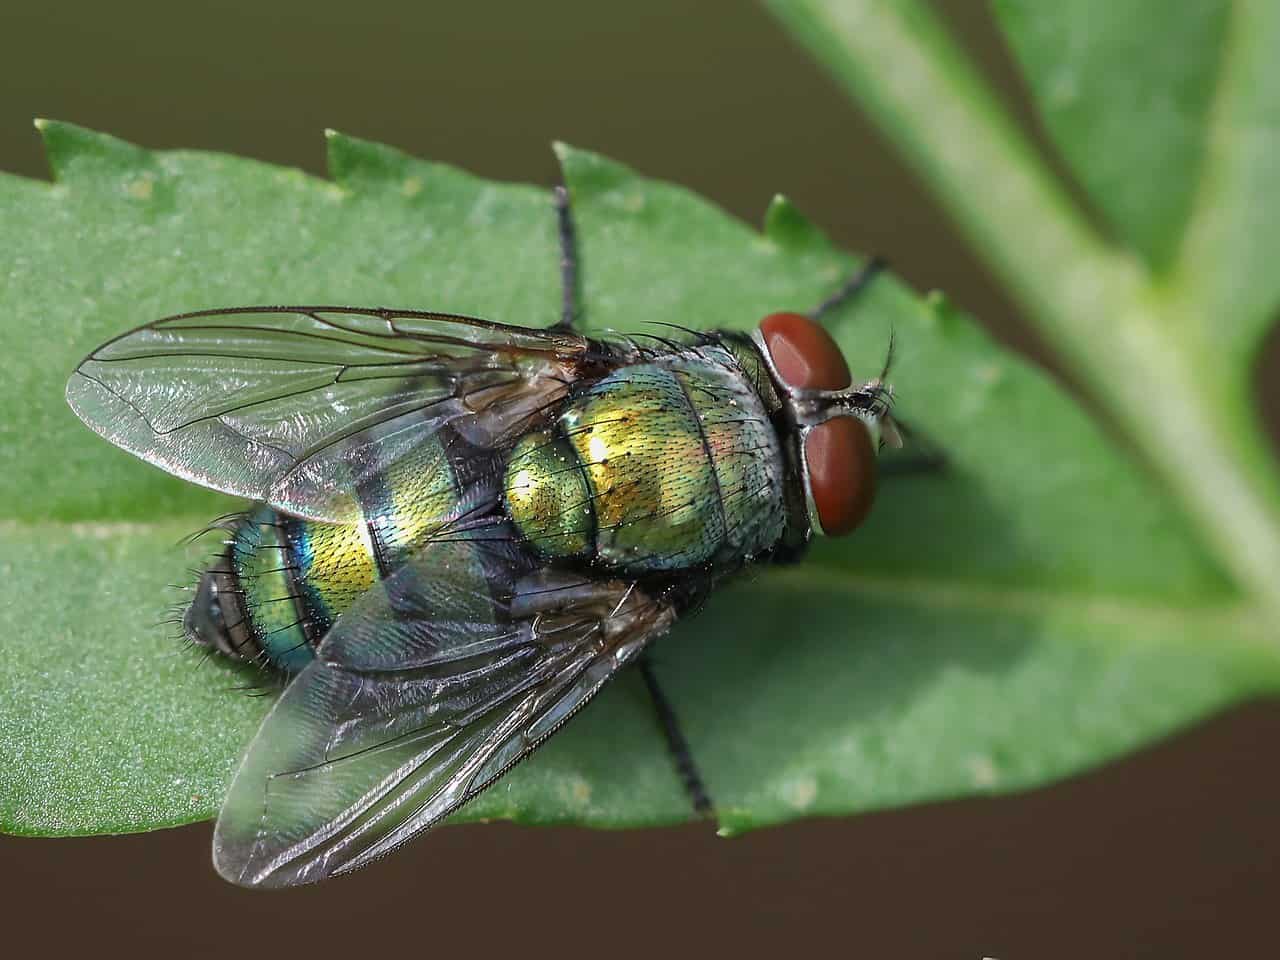 Fly infertility shows we’re underestimating how badly climate change harms animals